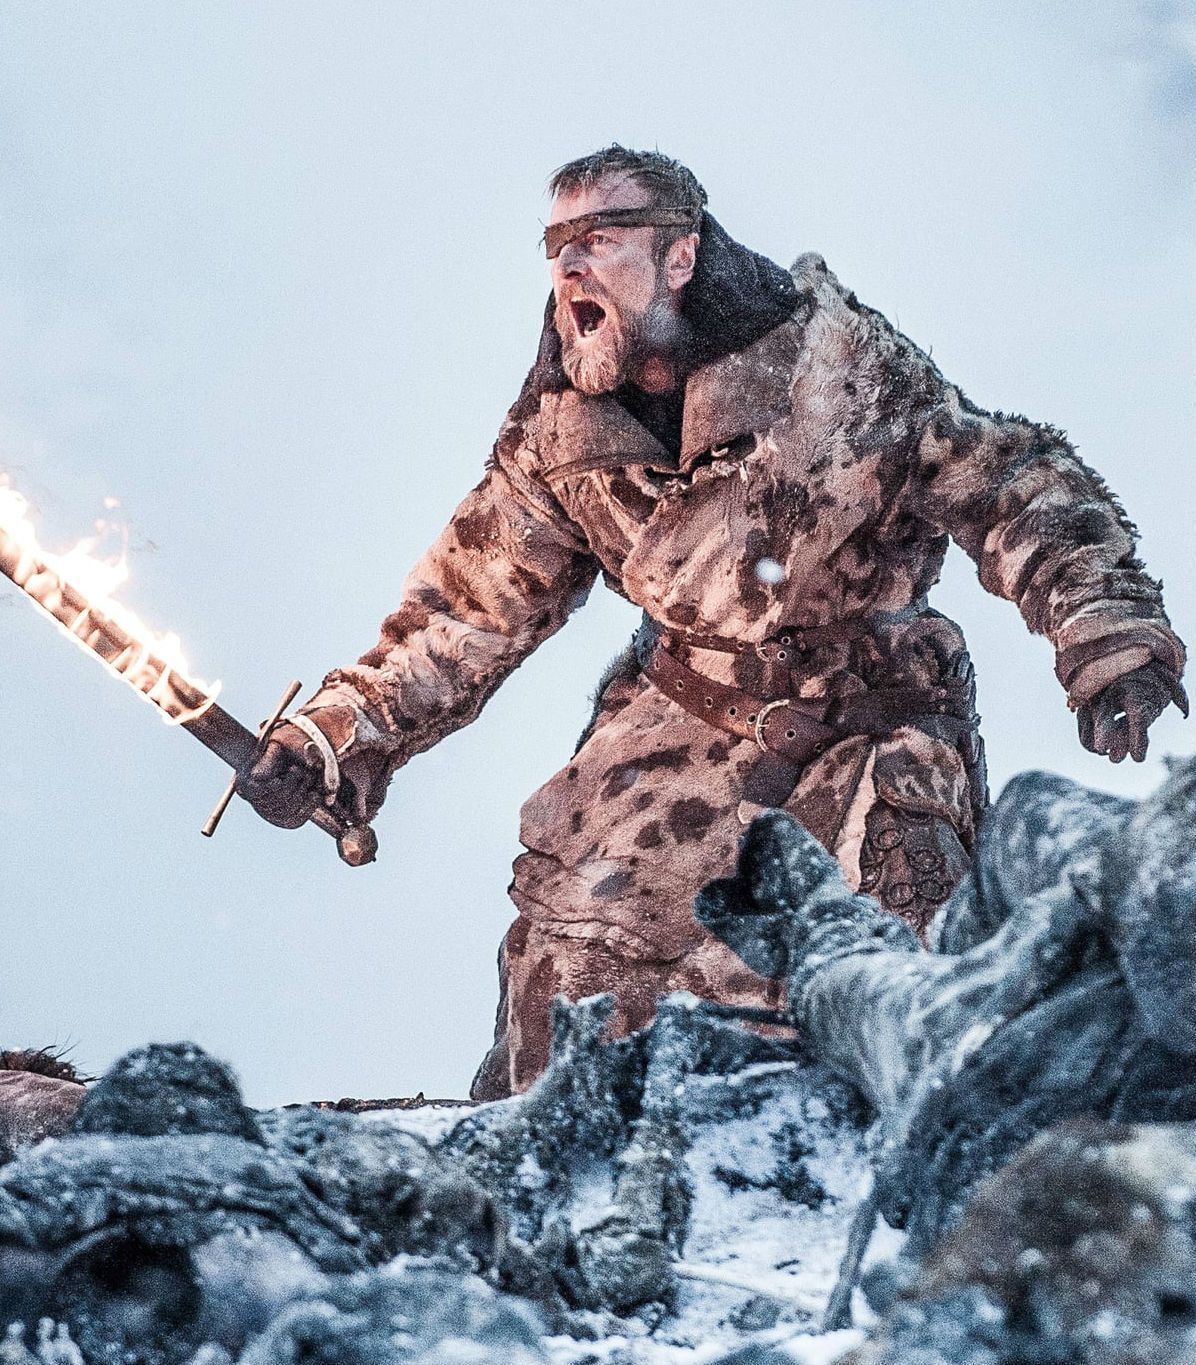 Game of Thrones Beric Dondarrion Vertical